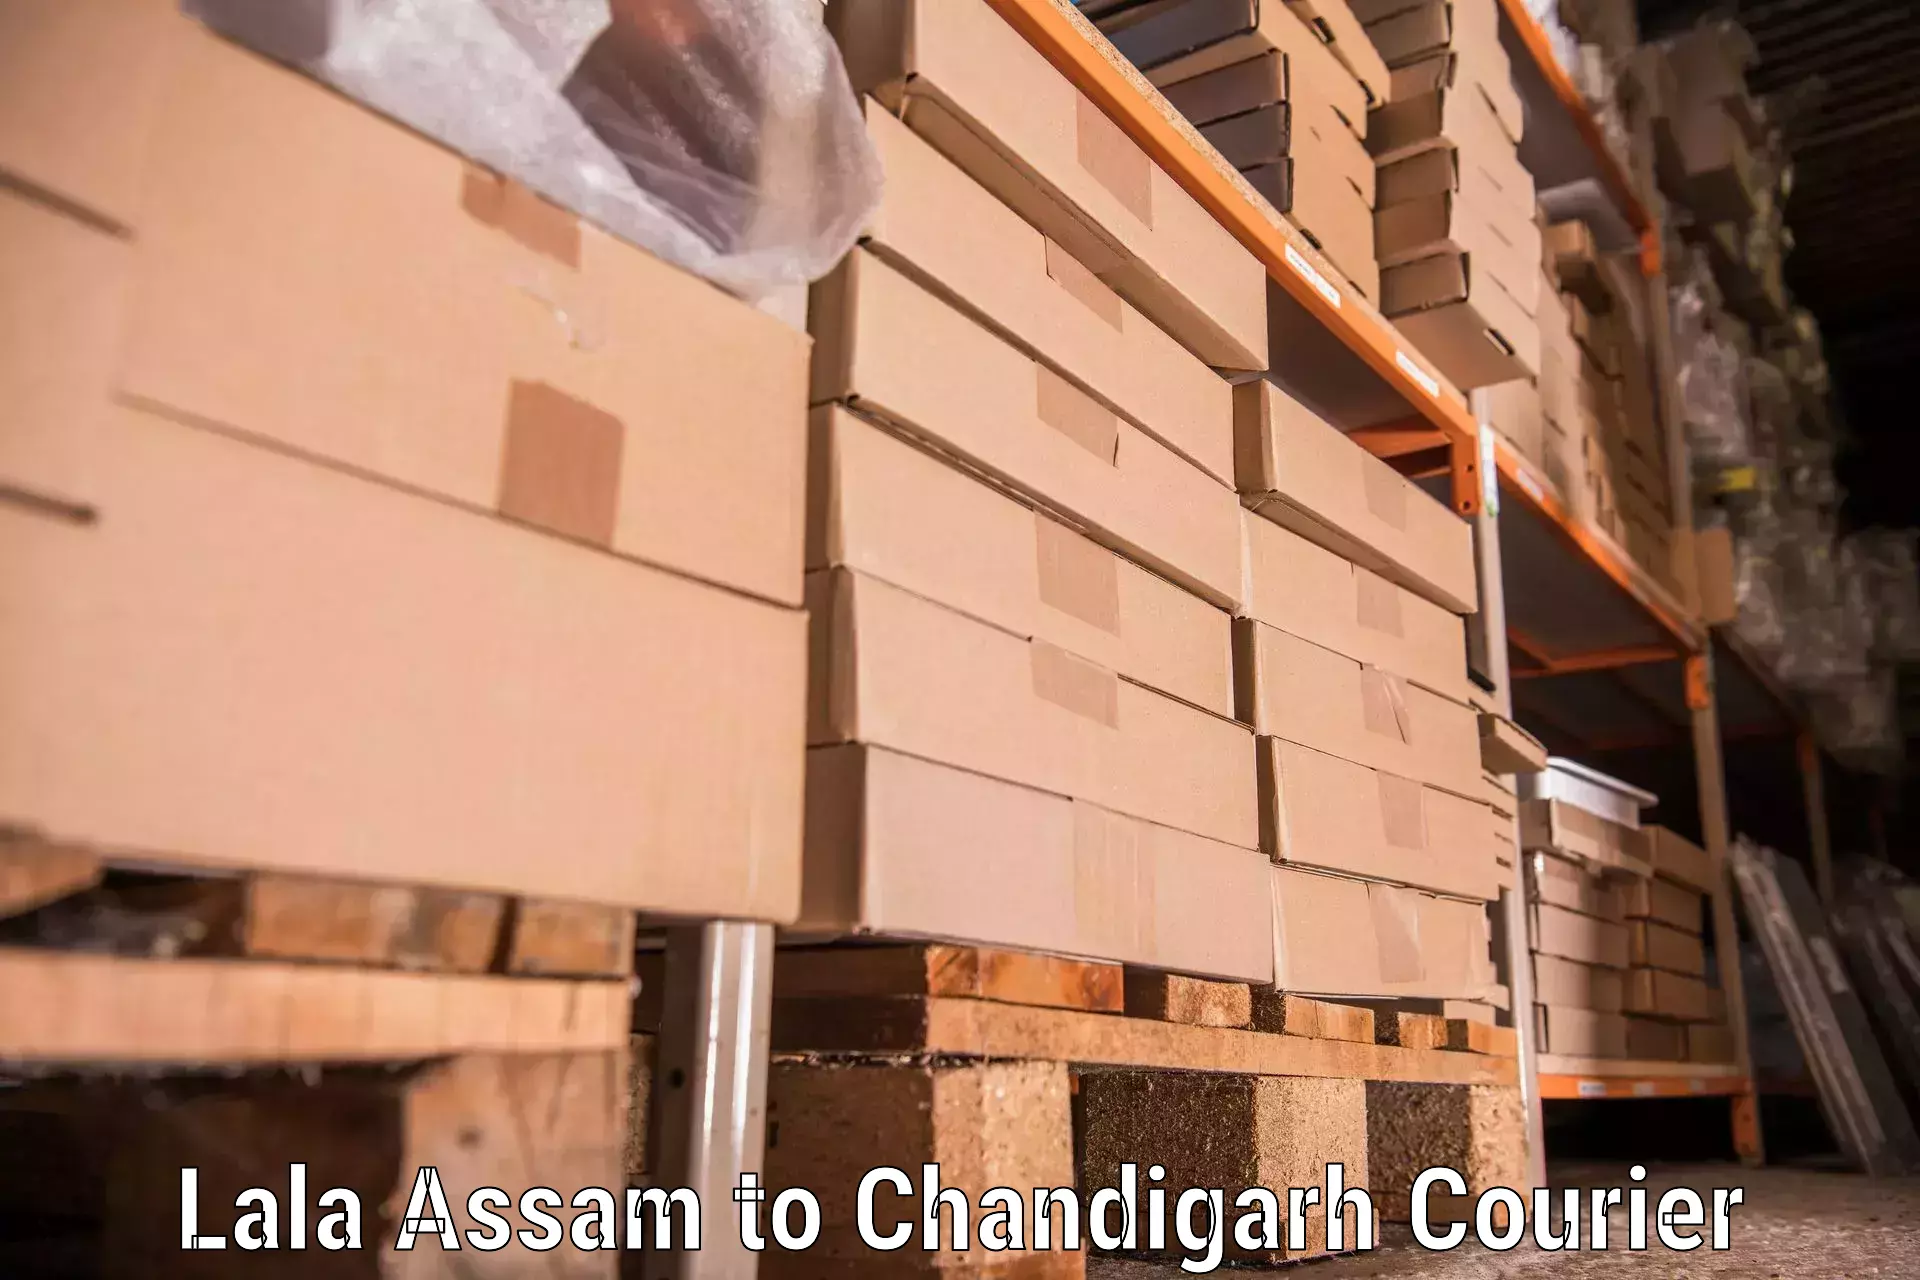 Furniture delivery service Lala Assam to Chandigarh